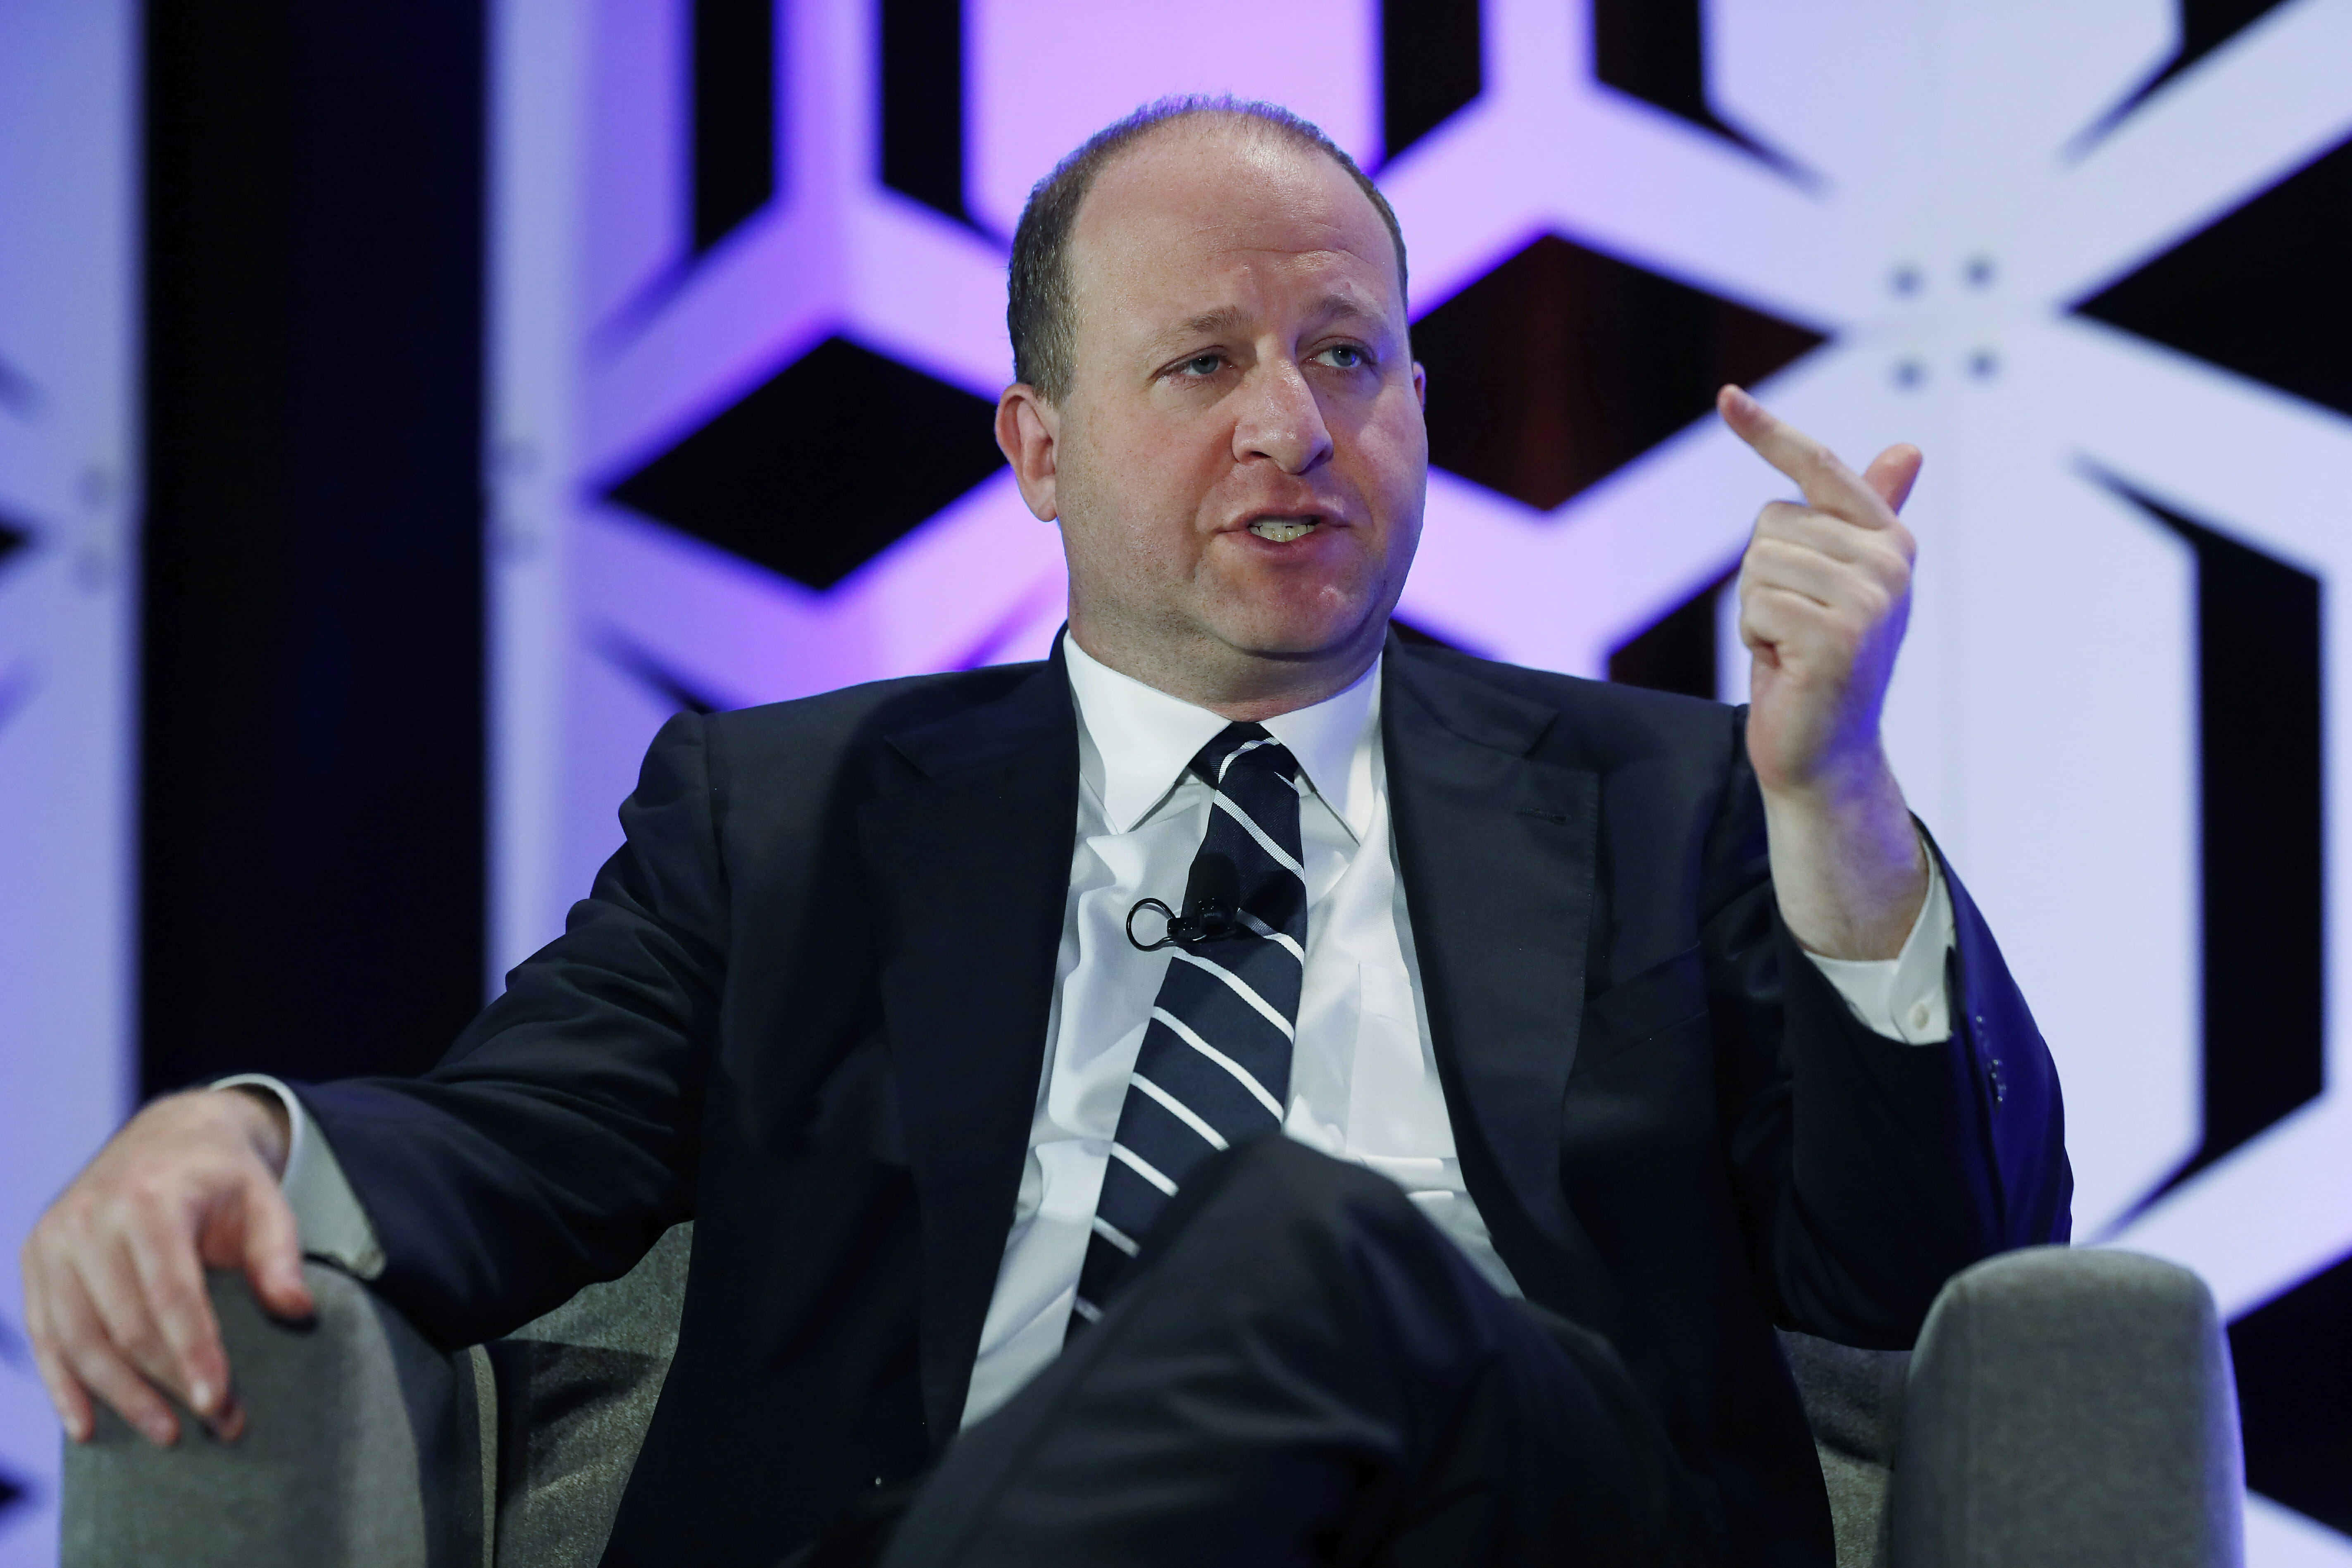 In this Aug. 28, 2019, file photo, Colorado Gov. Jared Polis speaks during an appearance at The Energy Summit in Denver.